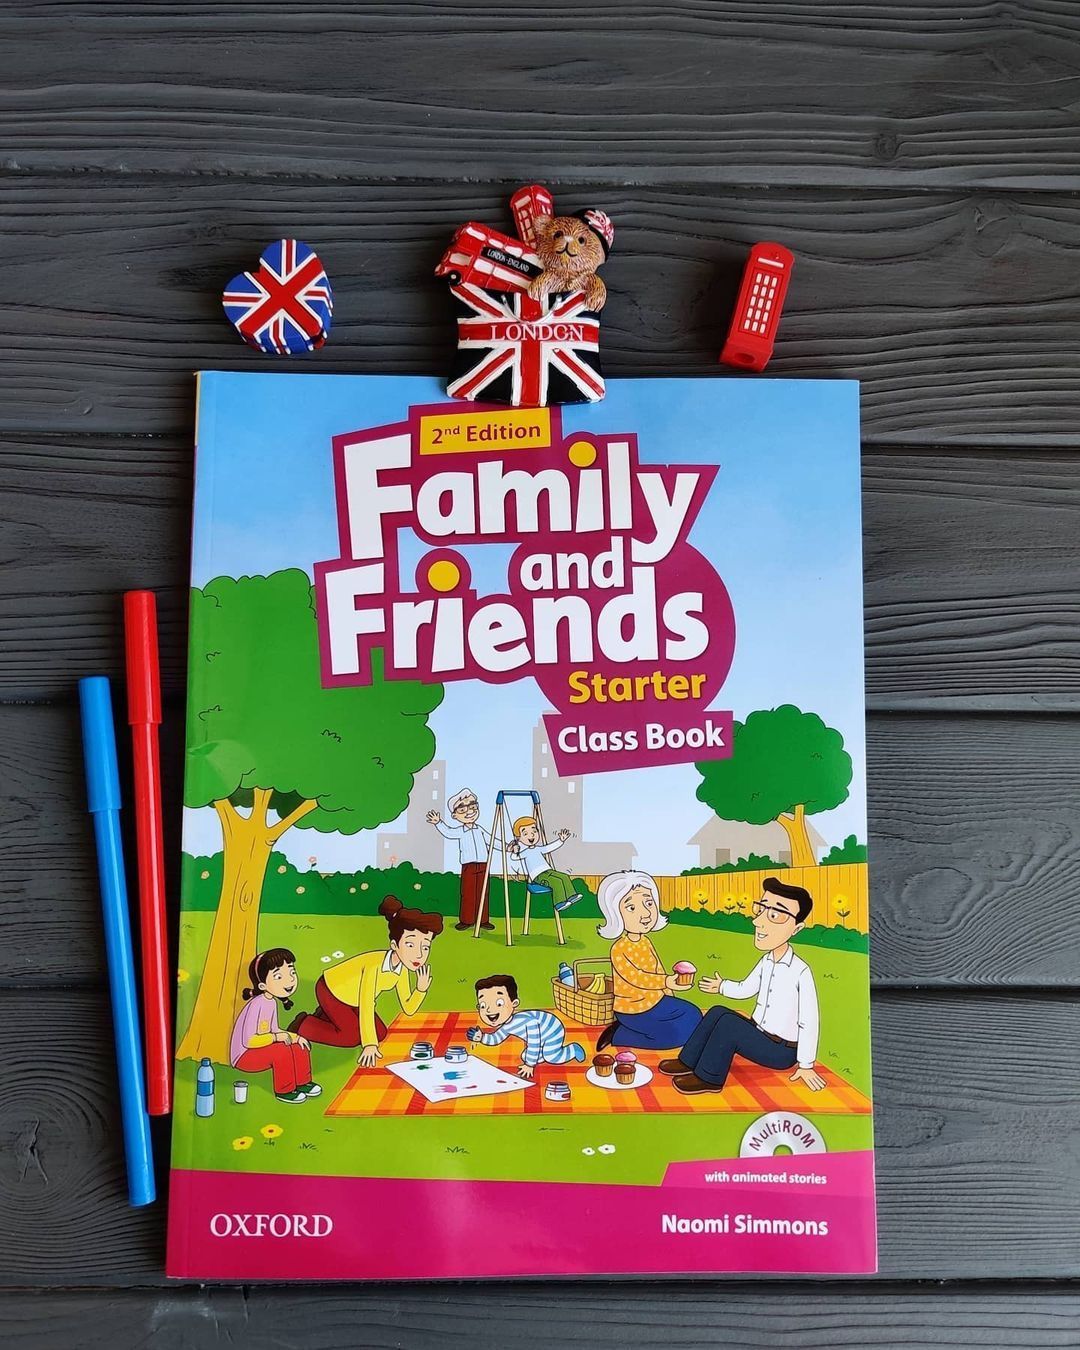 Family and friends starter book. Family and friends Starter class book.